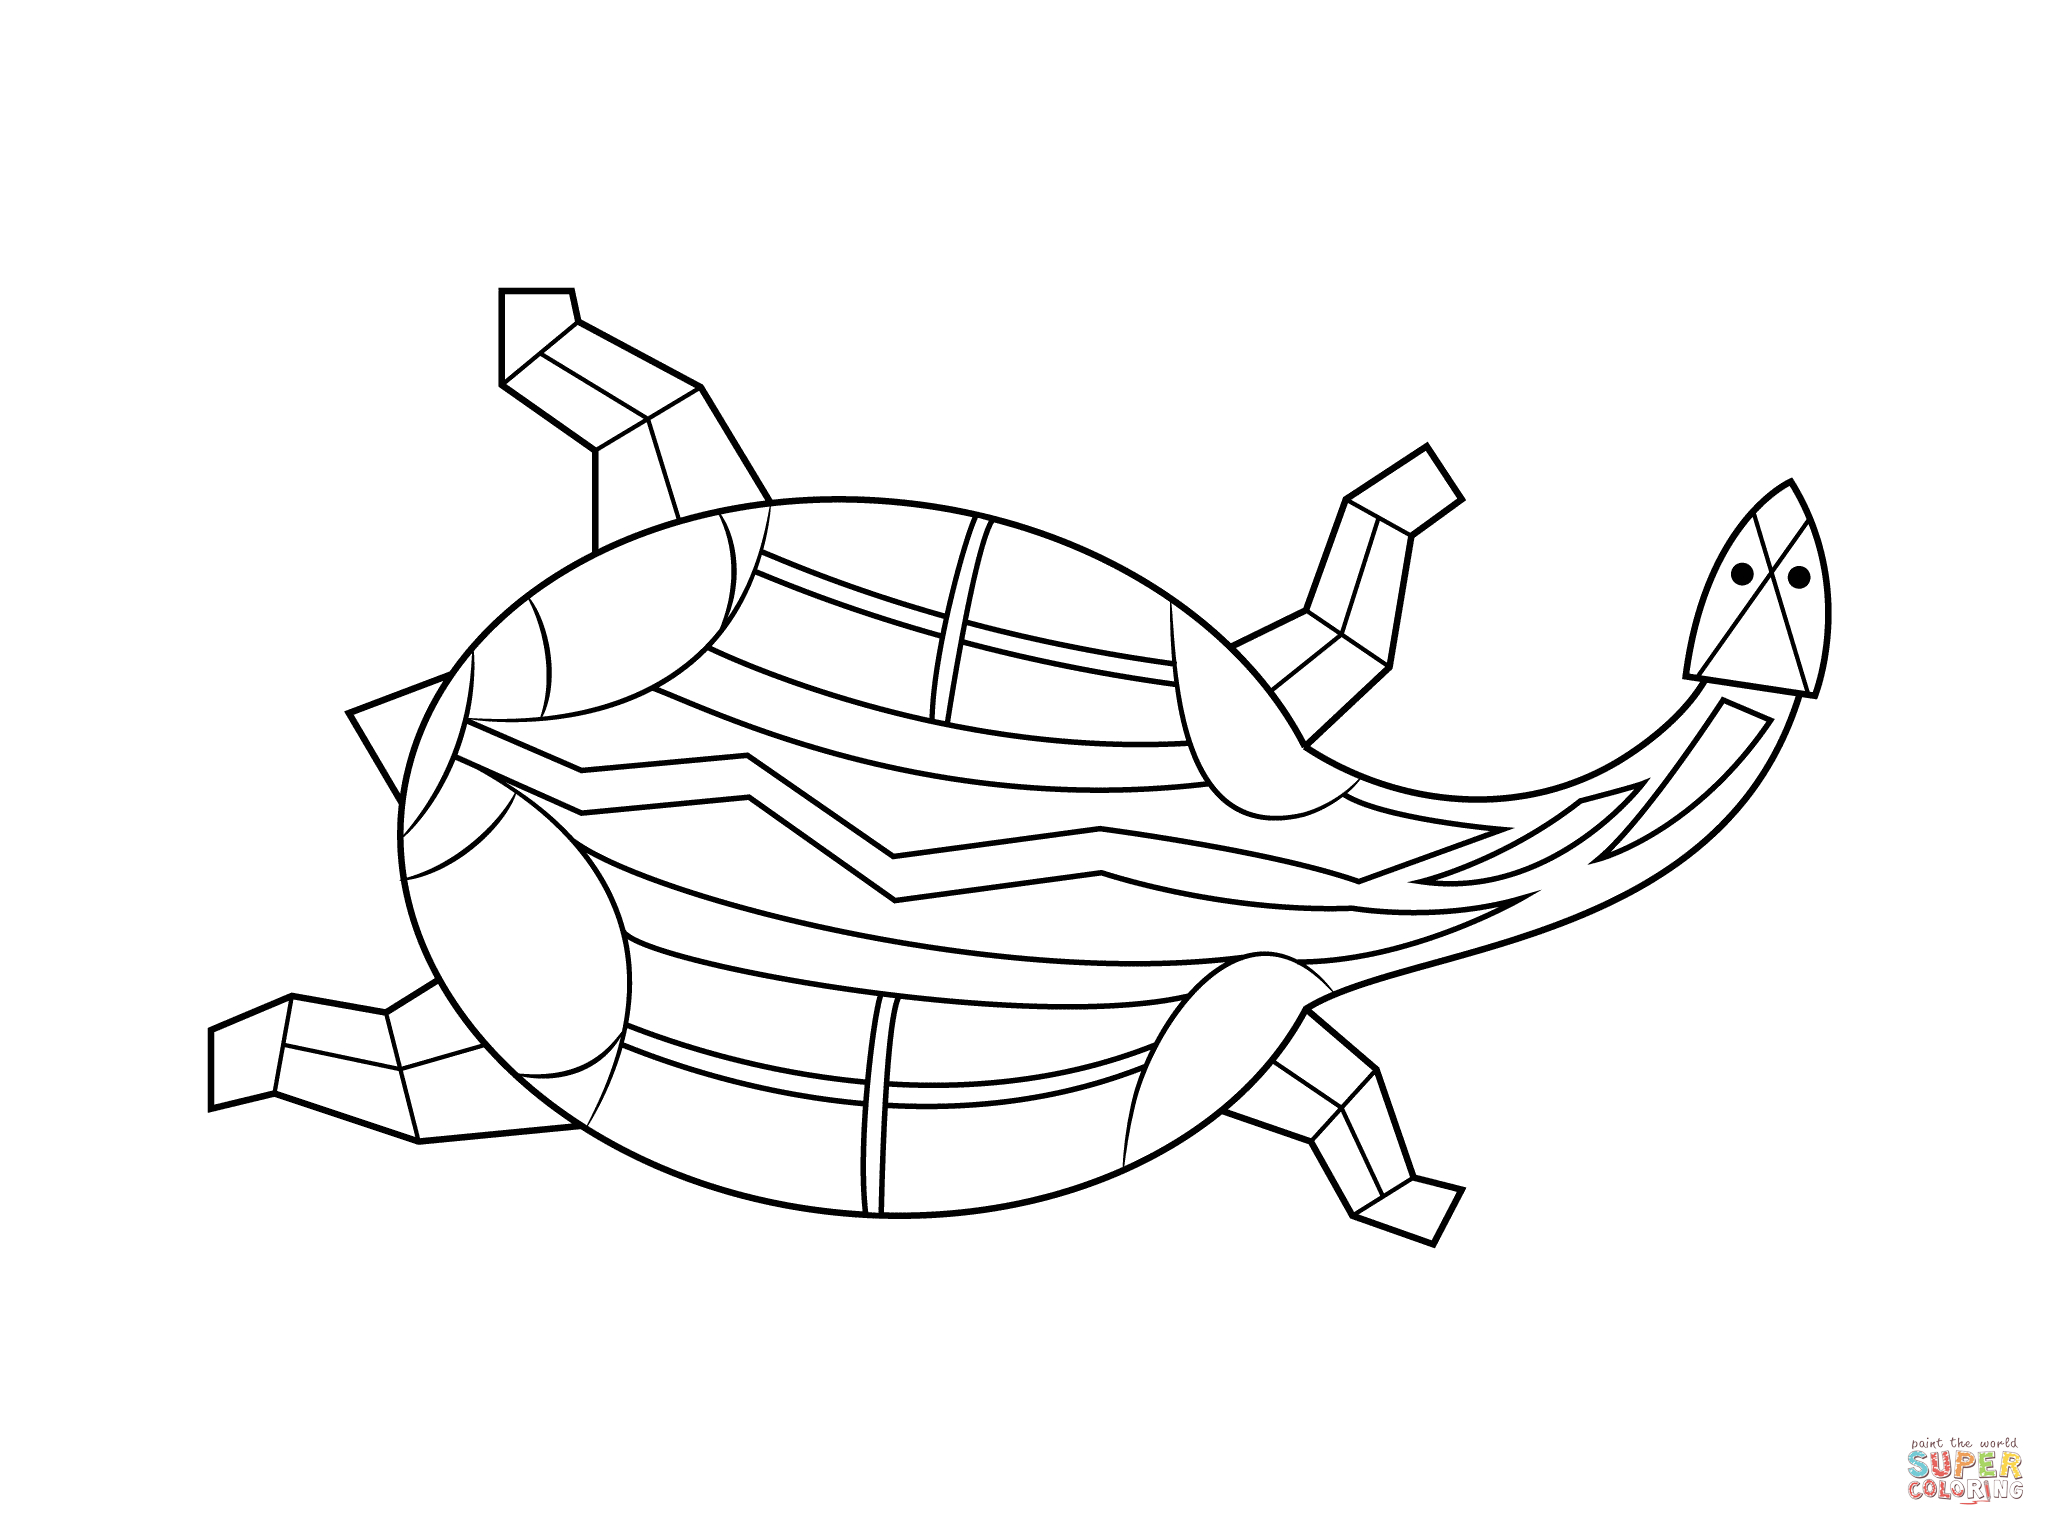 Aboriginal Painting Of Turtle Coloring Page | Free Printable - Free Printable Aboriginal Colouring Pages